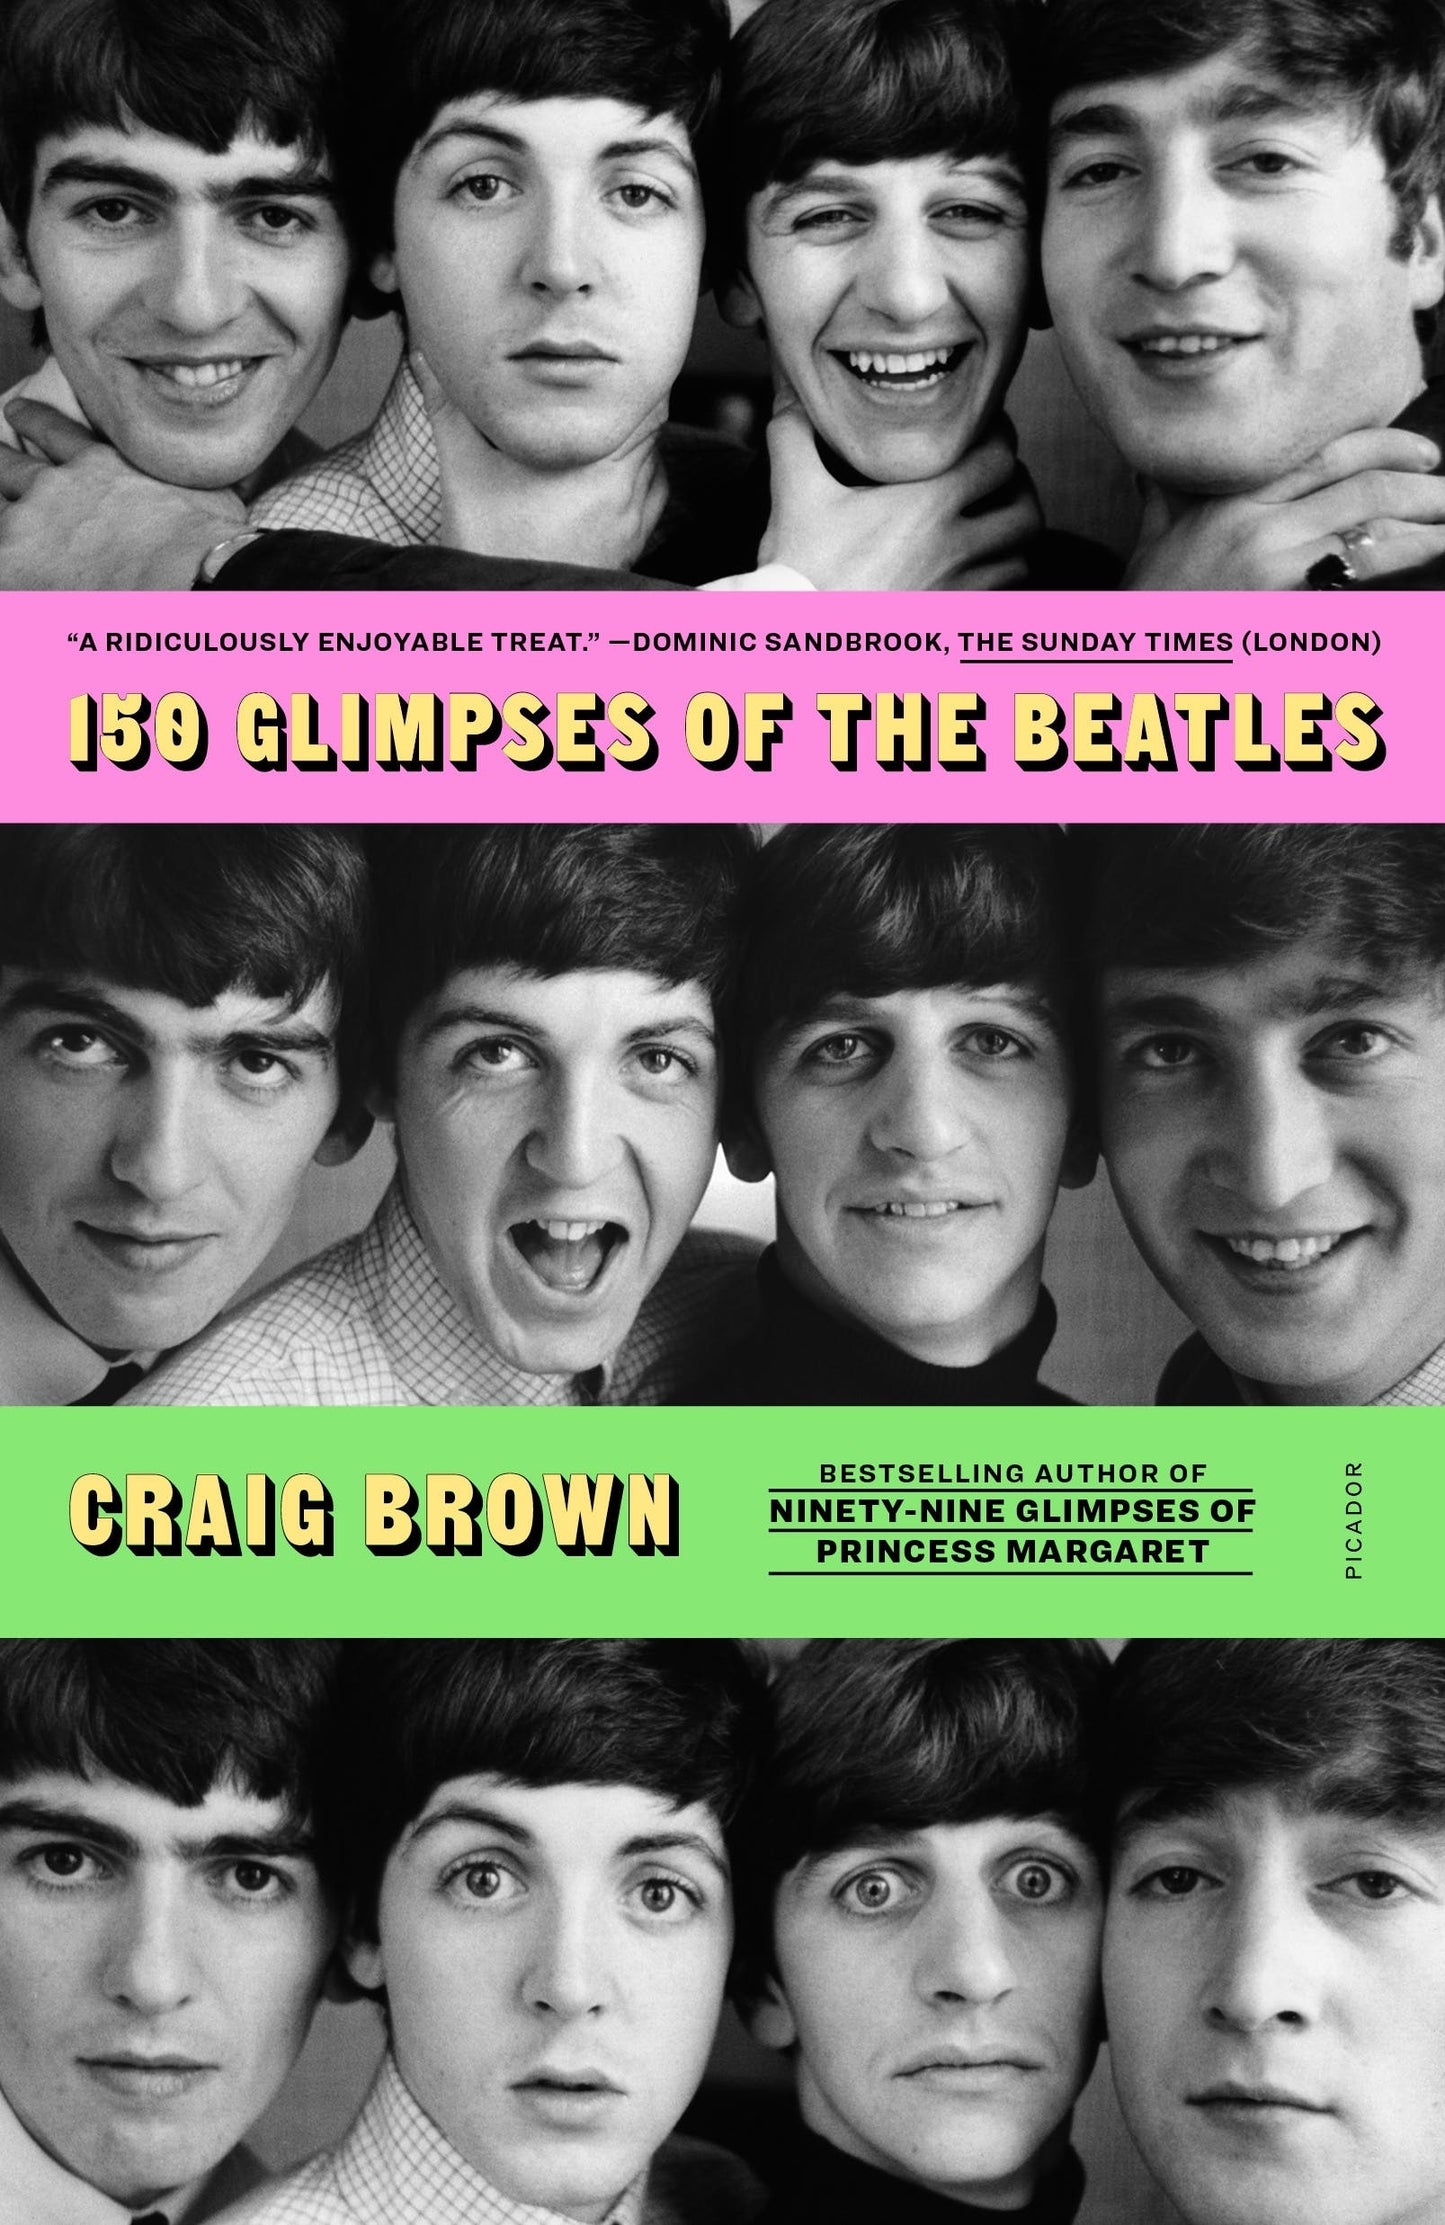 THE BEATLES - 150 GLIMPS OF THE BEATLES - PAPERBACK - LIBRO